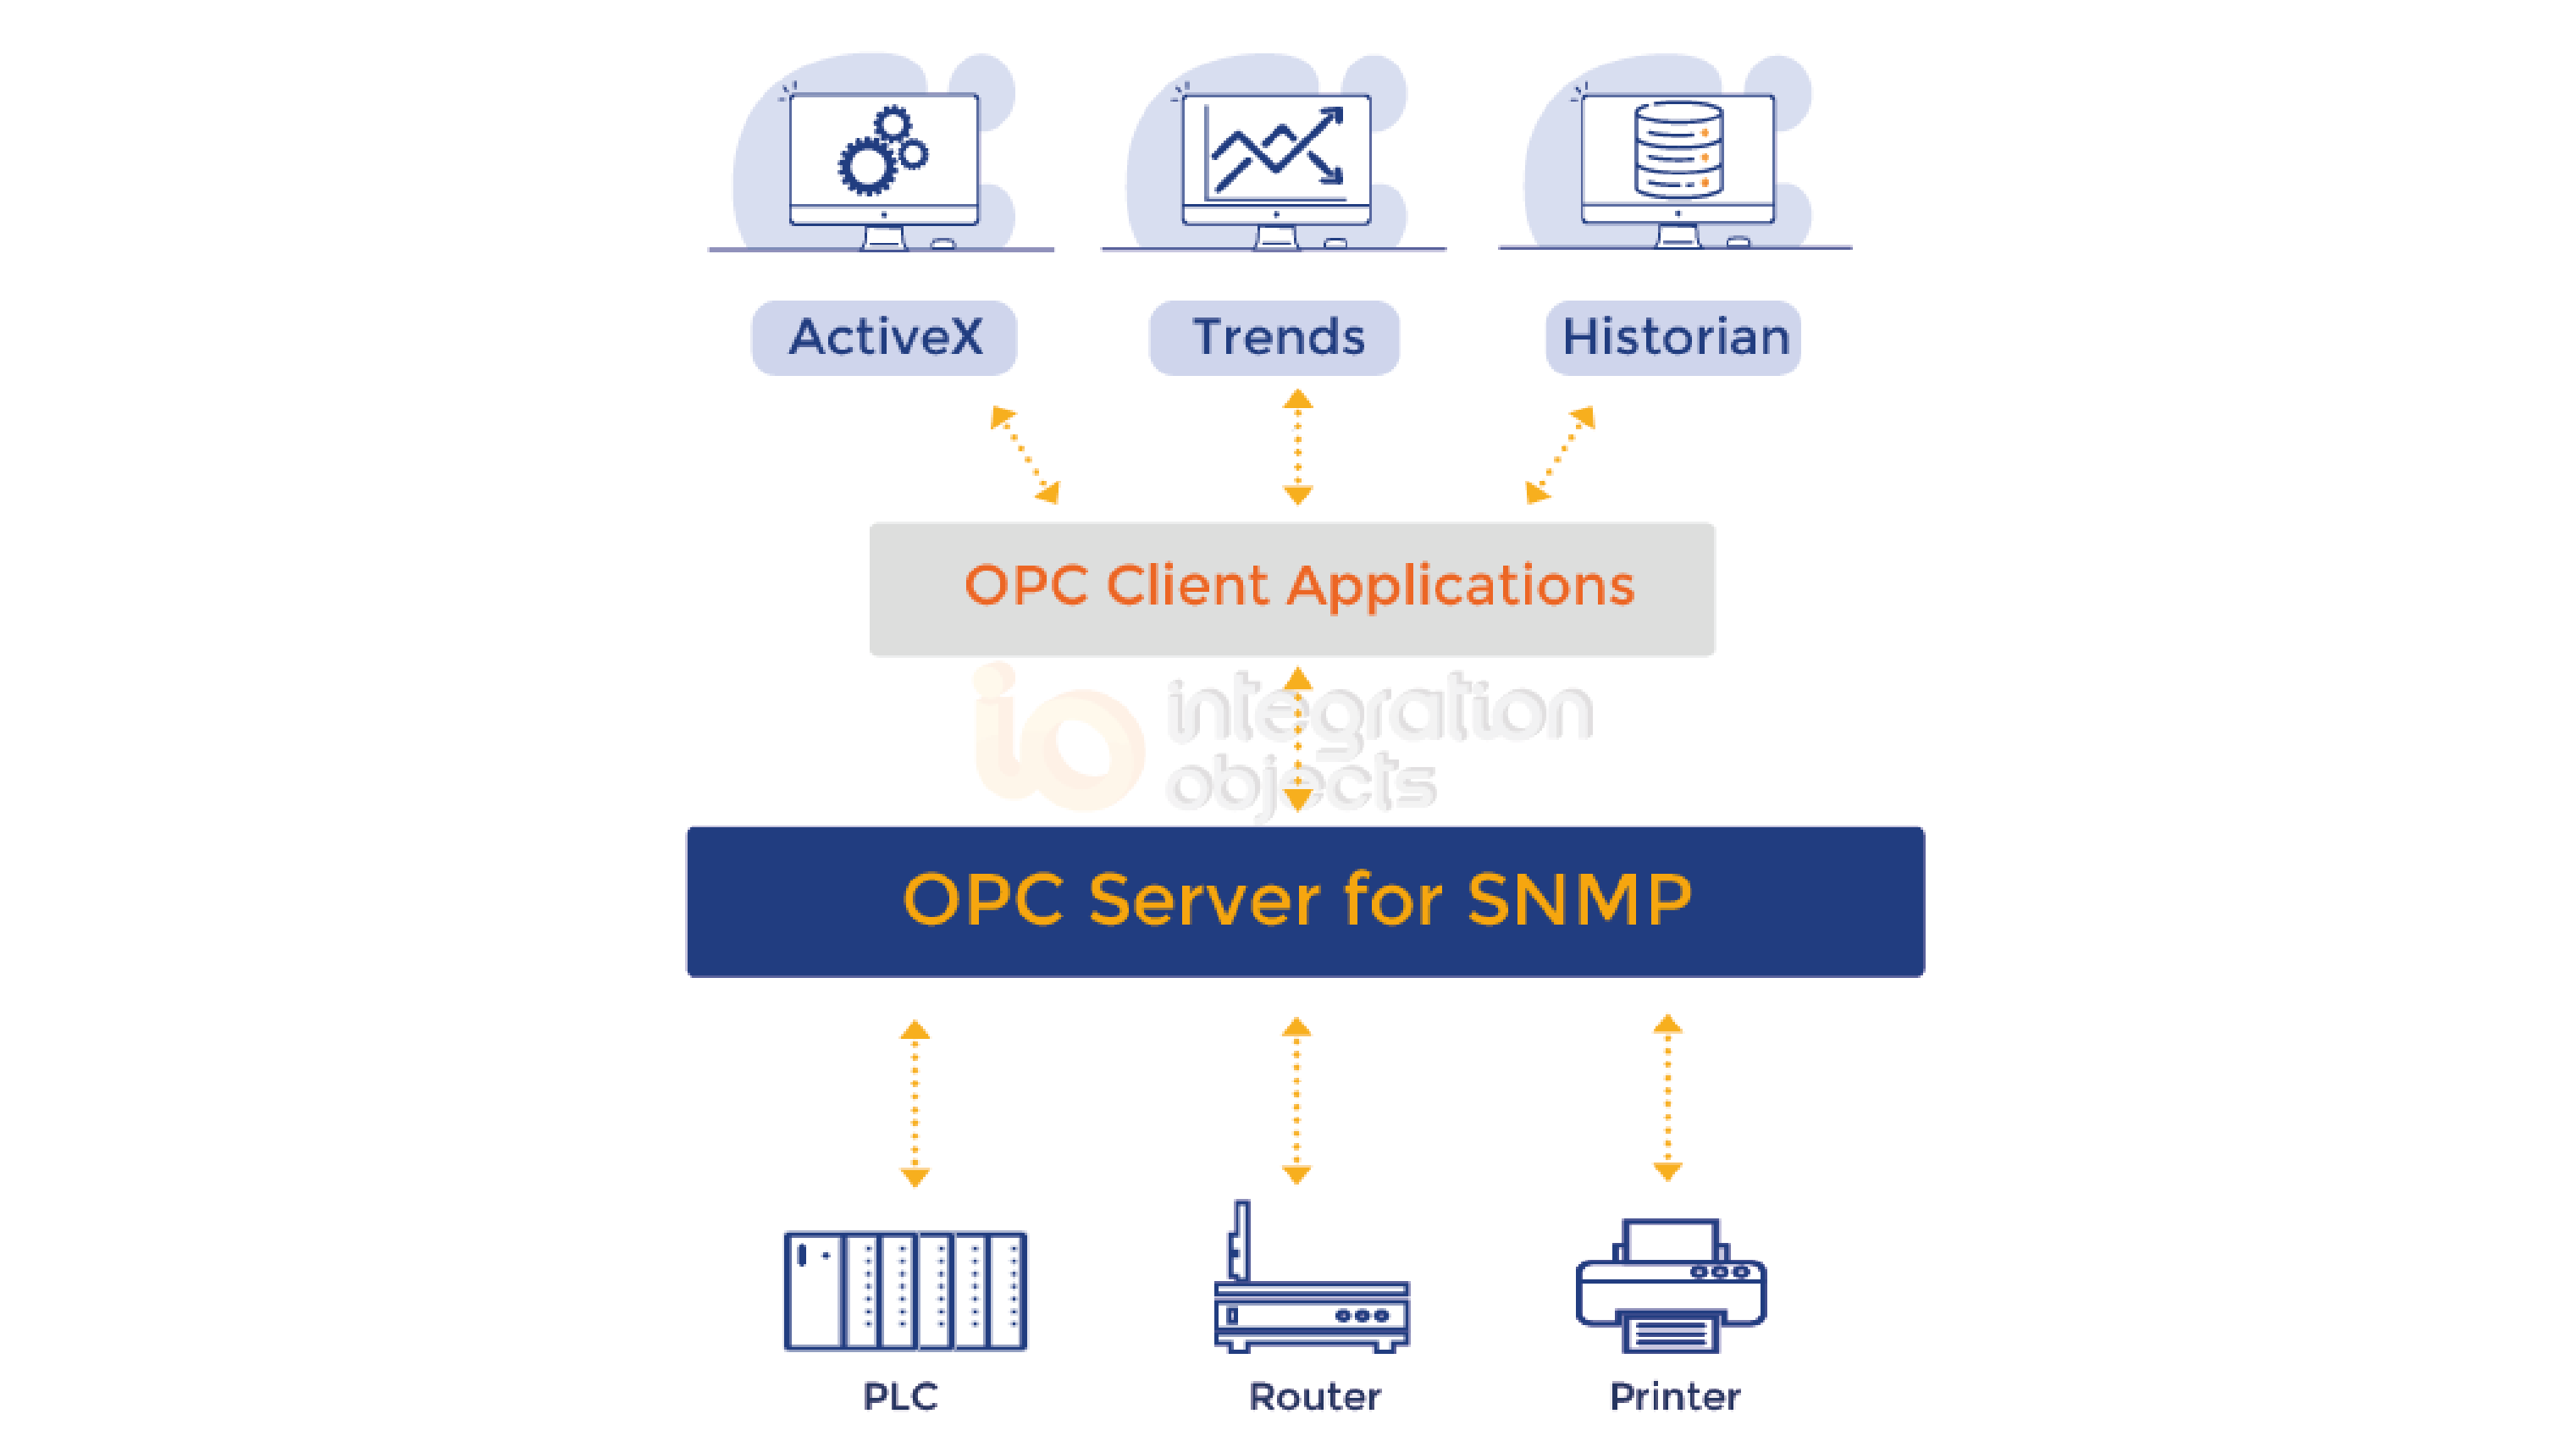 OPC Server for SNMP